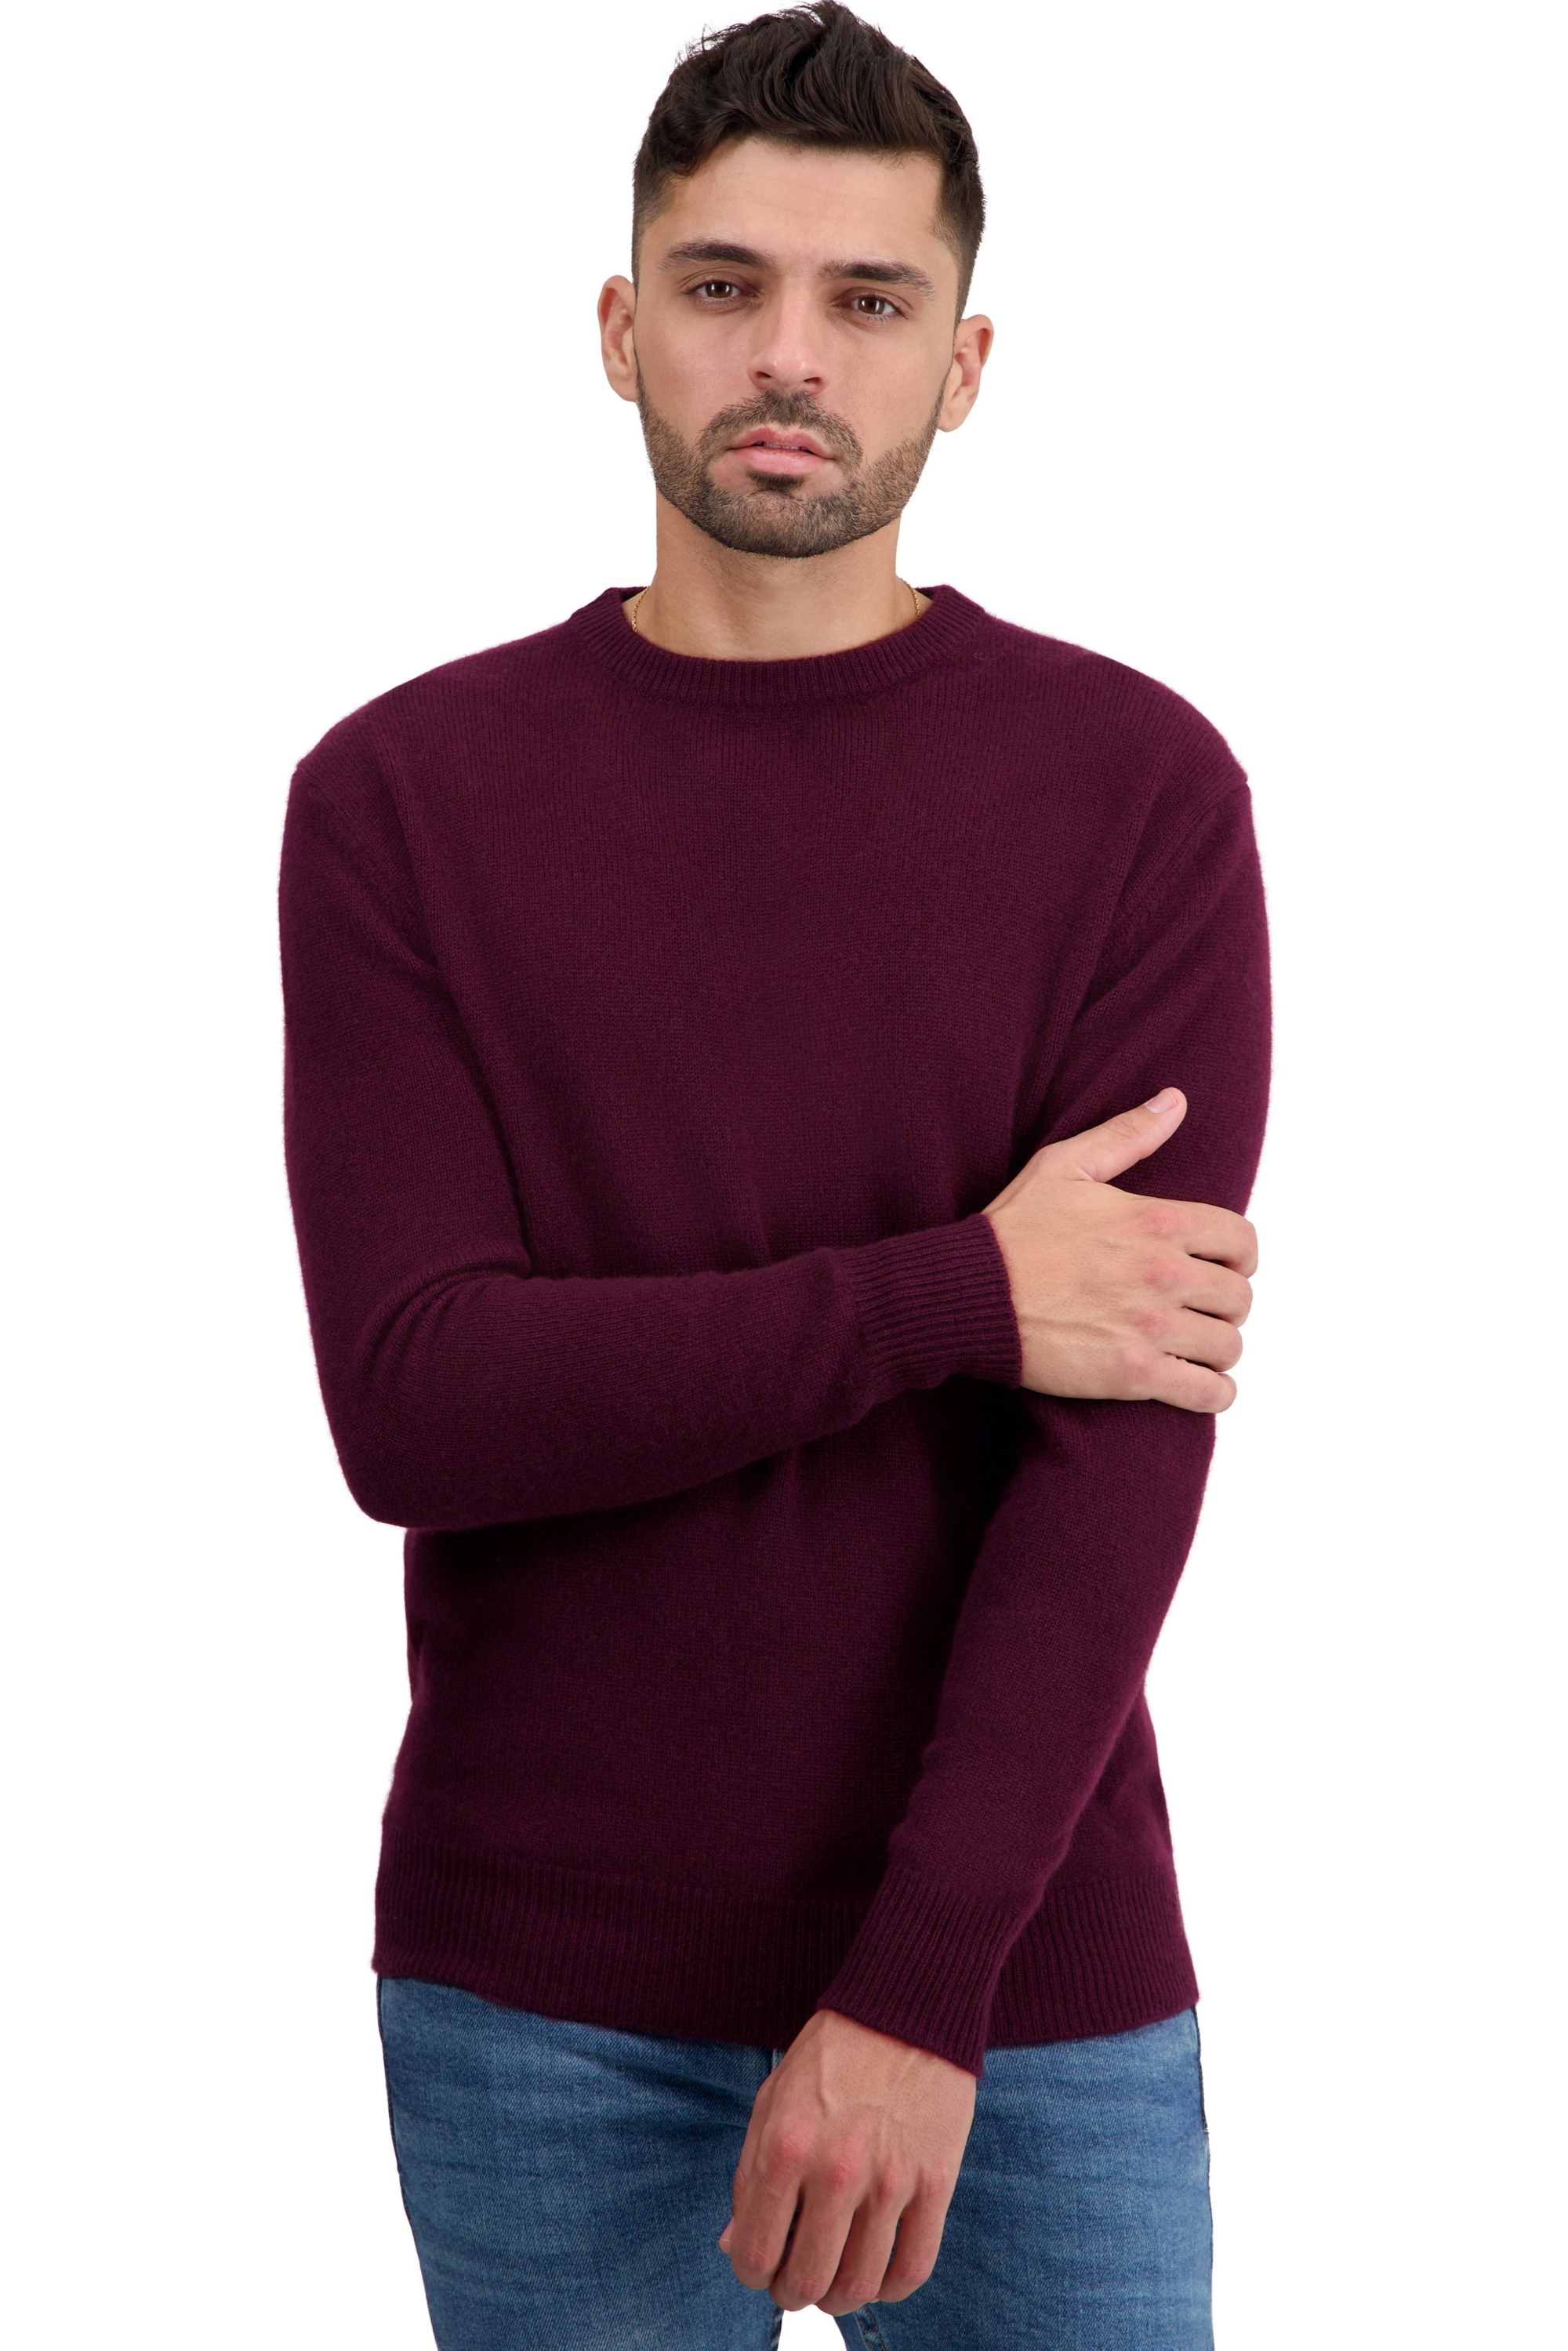 Cashmere men basic sweaters at low prices touraine first bordeaux l